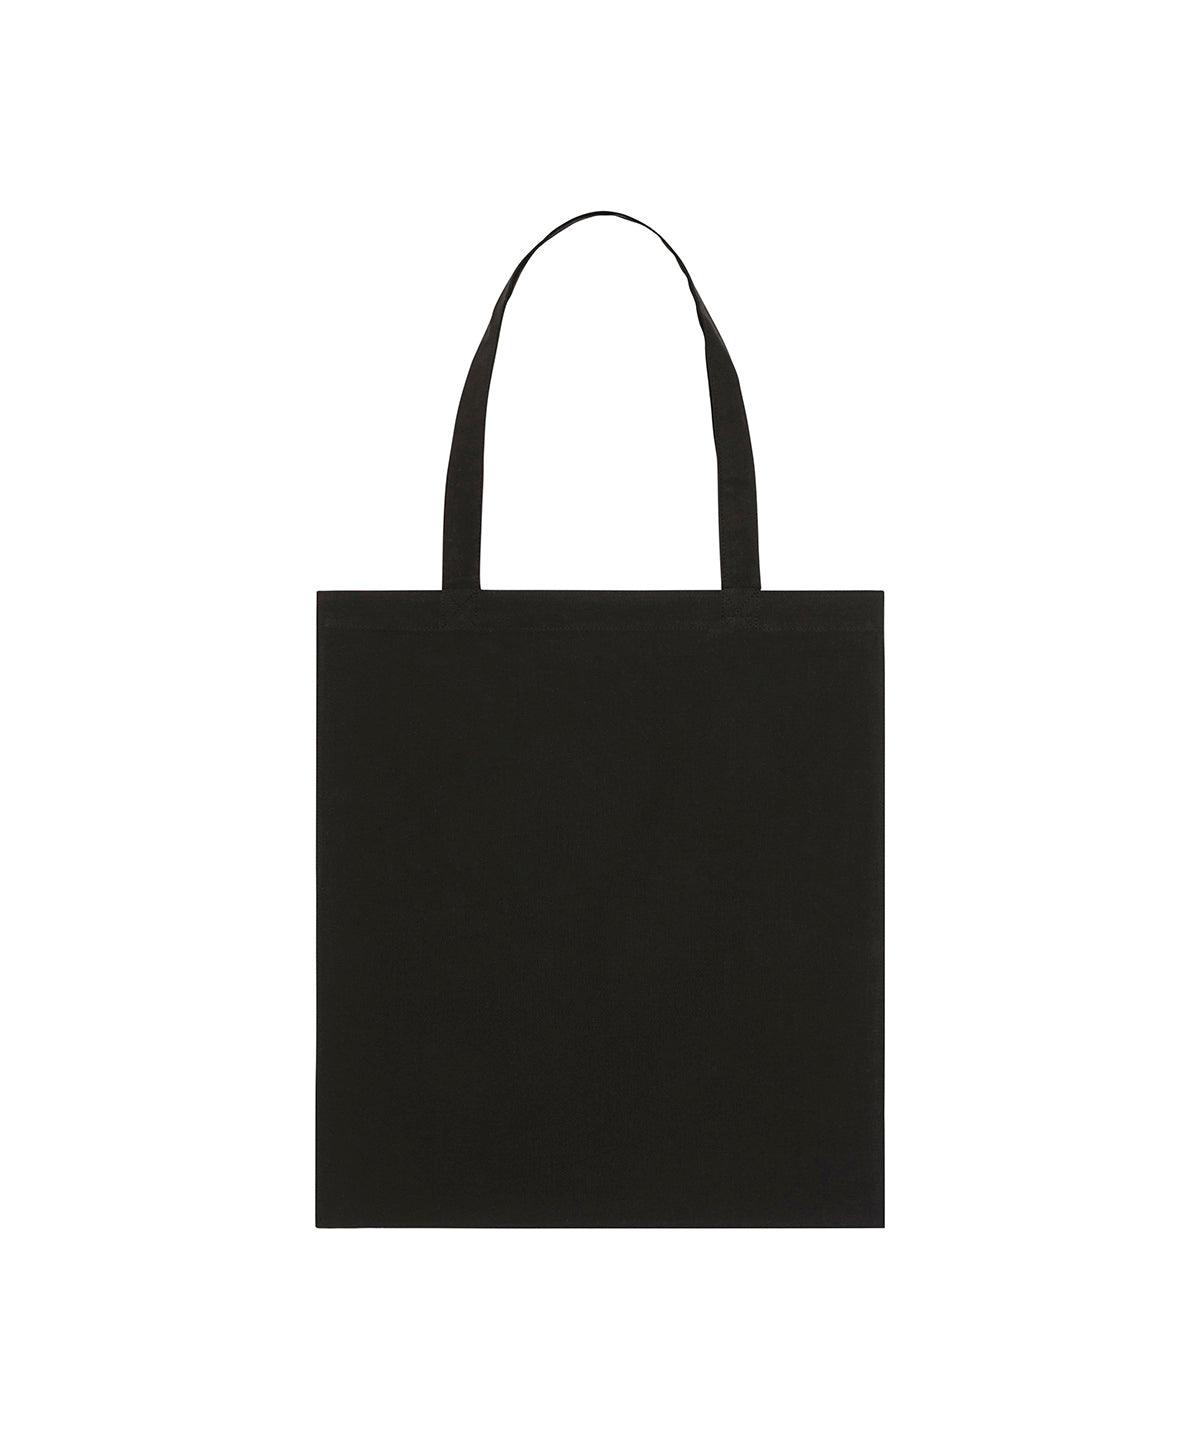 Black - Light tote bag (STAU773) Bags Stanley/Stella Bags & Luggage, Exclusives, New Styles For 2022, Organic & Conscious Schoolwear Centres